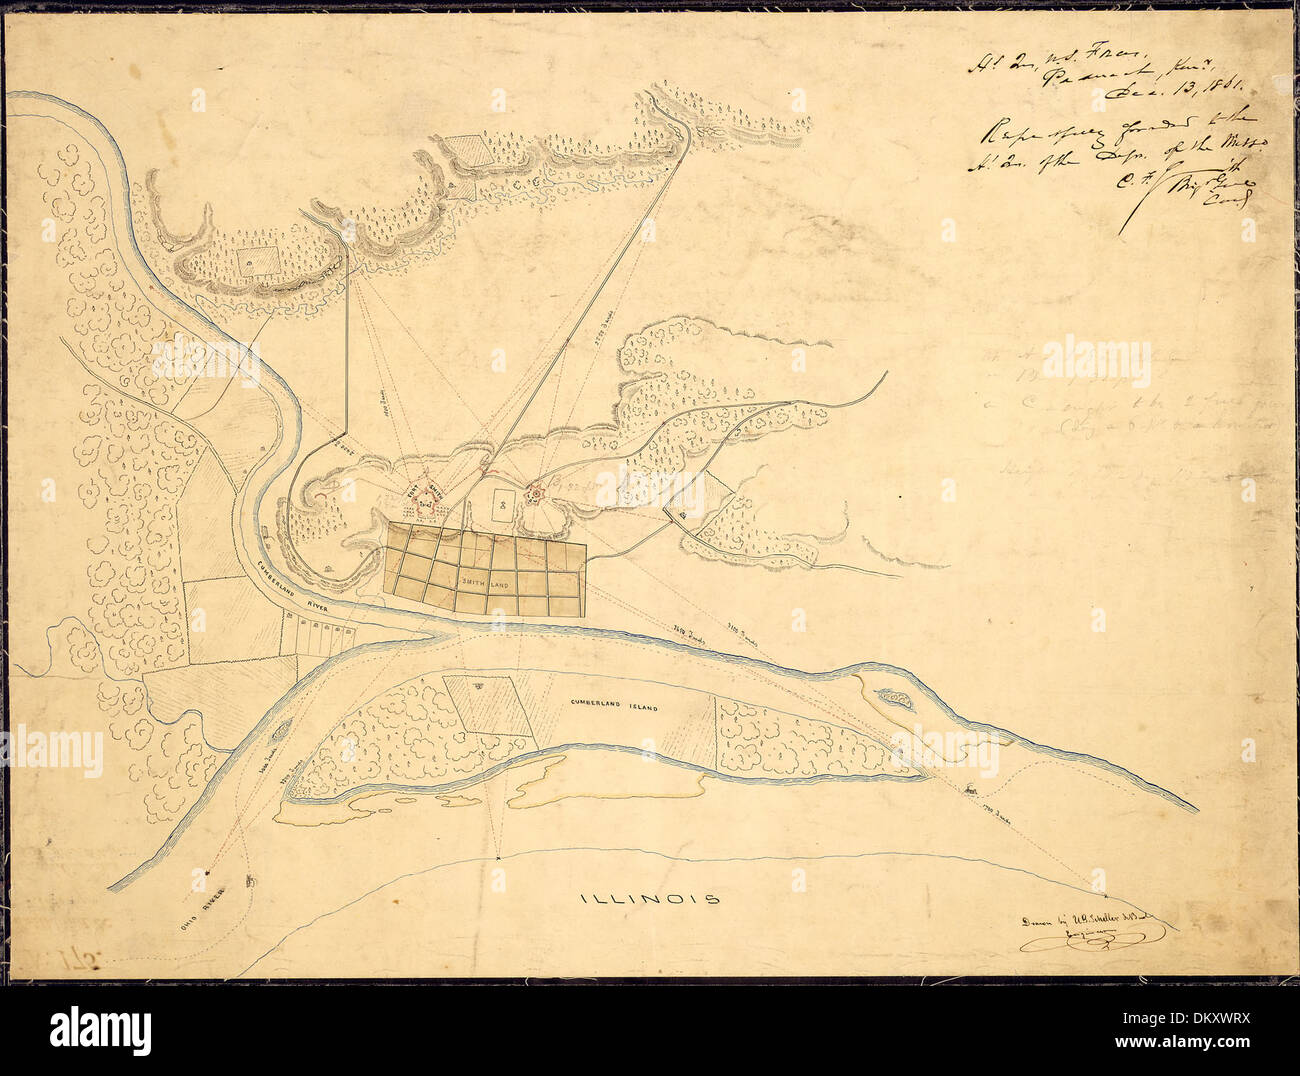 (Sketch map of Smithland and vicinity) Drawn by U. G. Scheller (5E) Engineer. 305722 Stock Photo